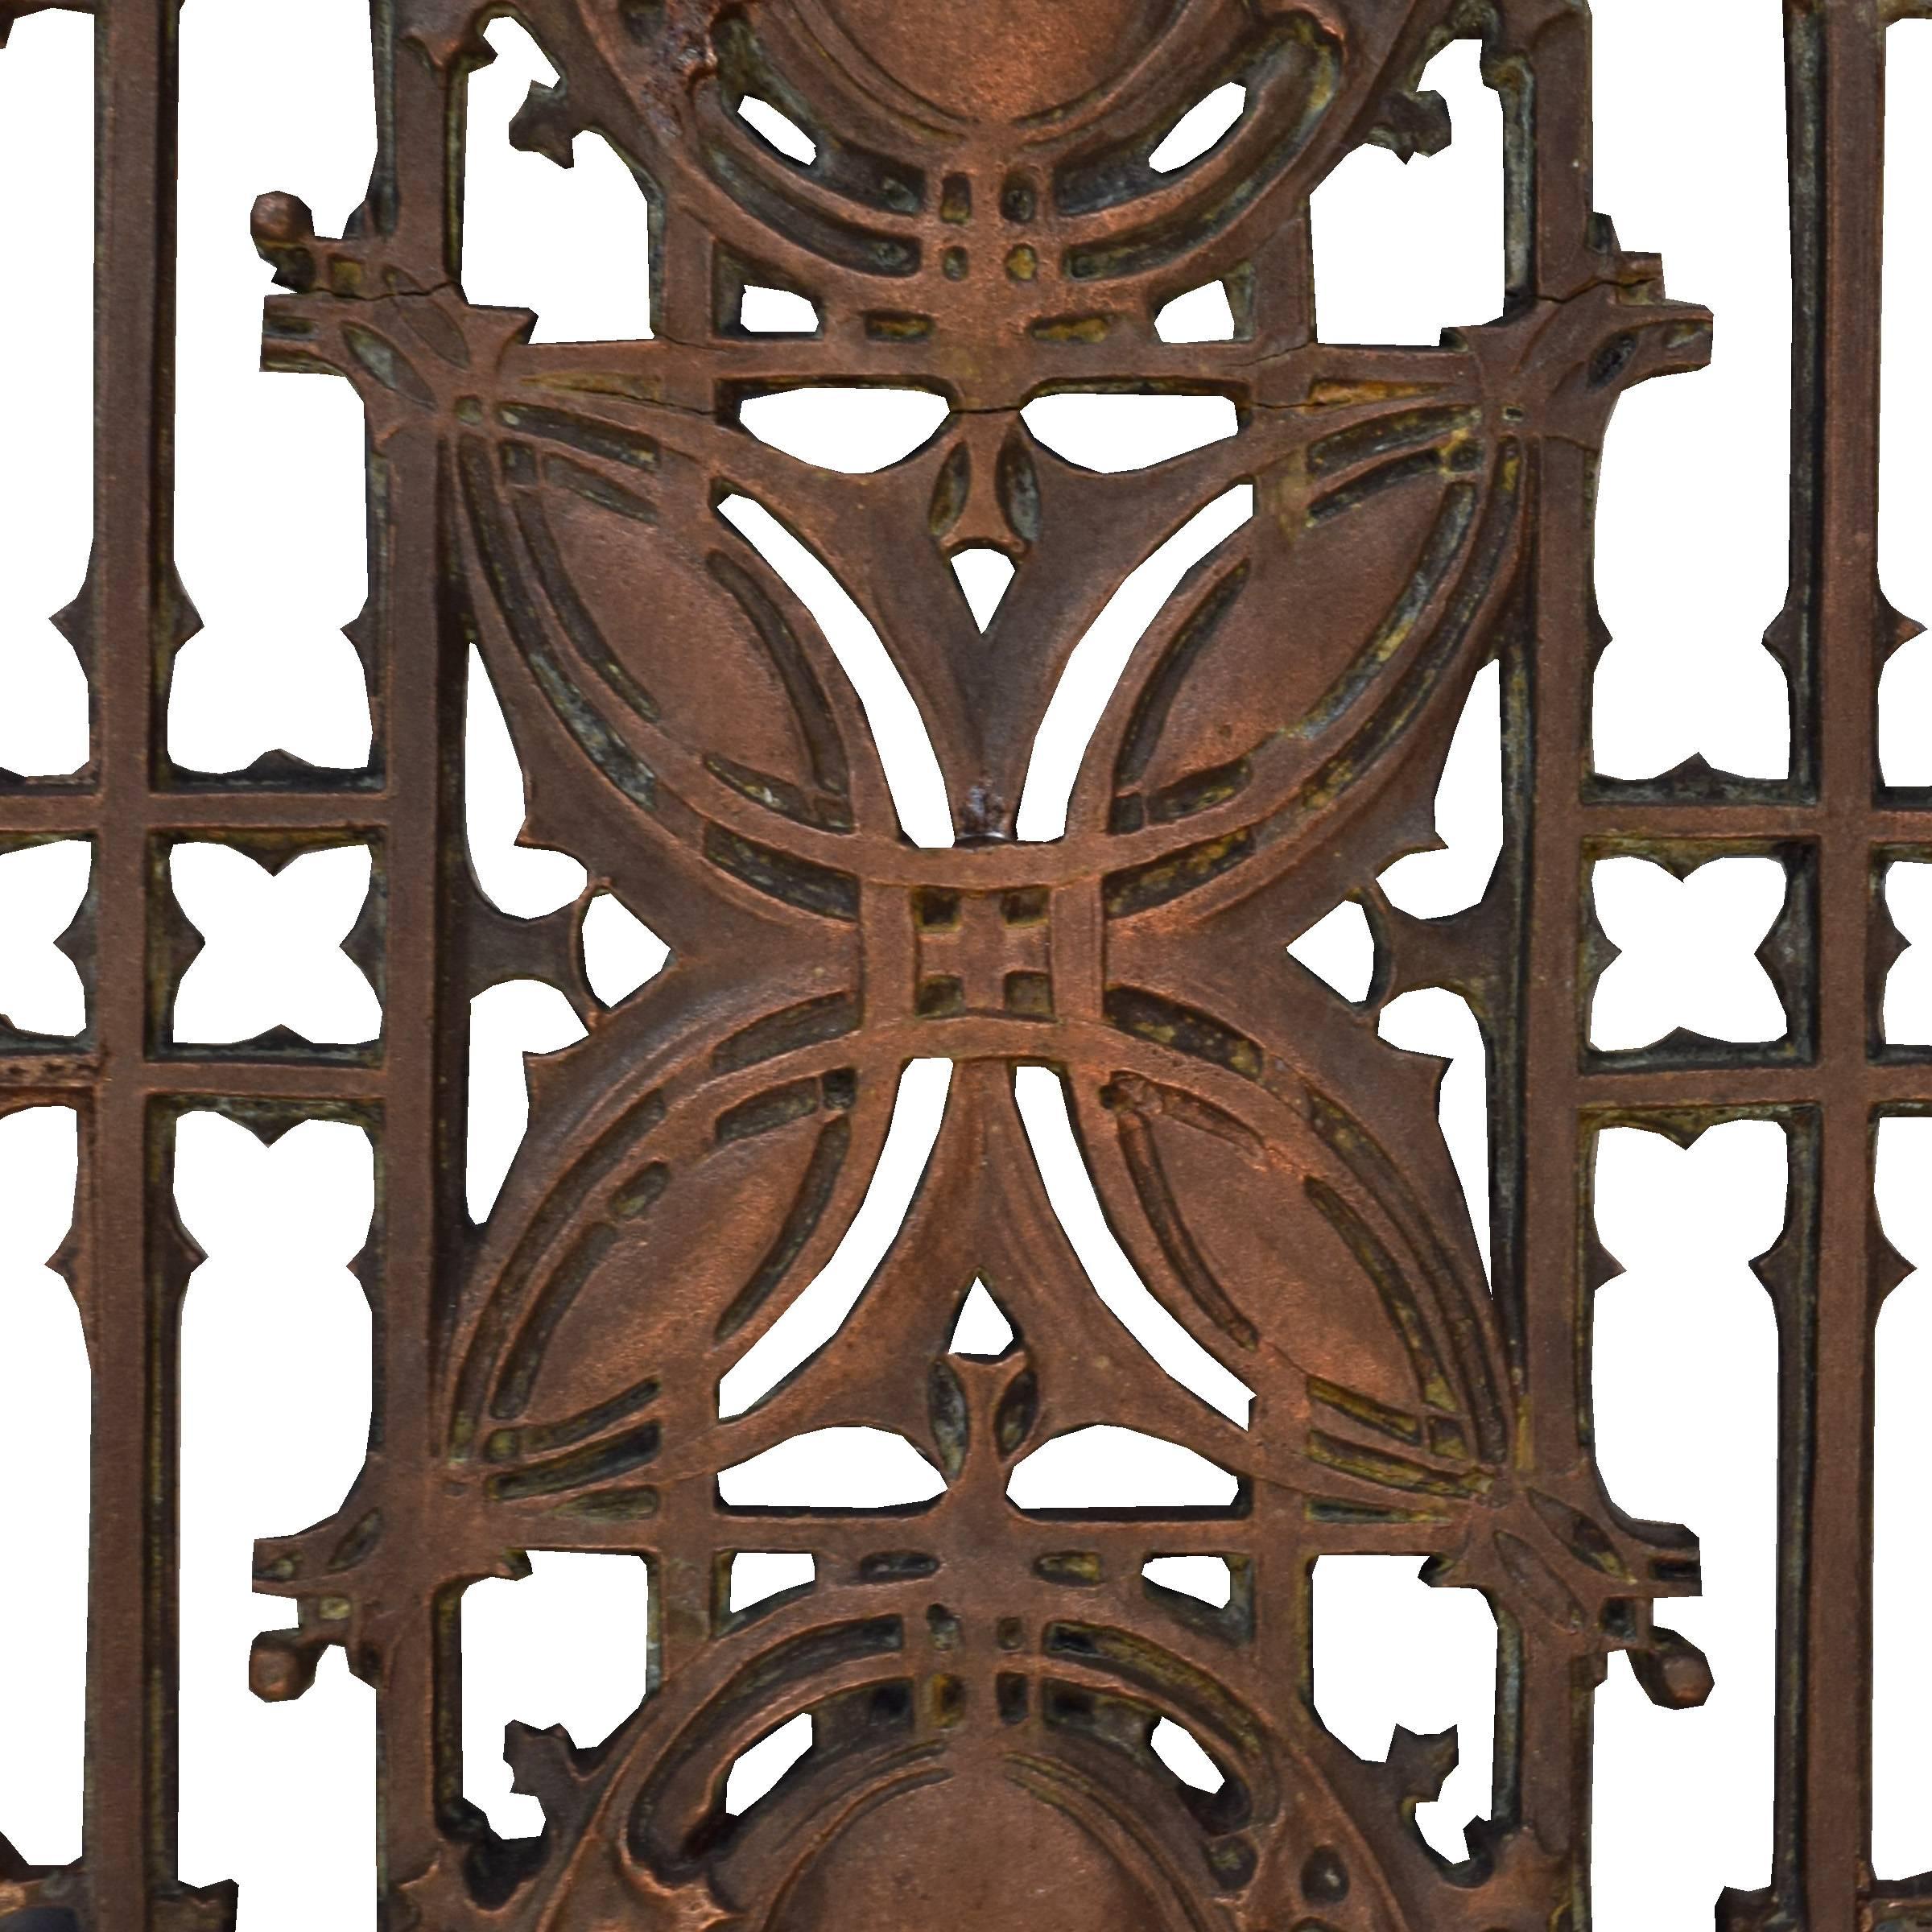 A Louis Sullivan designed copper over iron stair baluster from the Schlesinger and Mayer building, 1899, later known as the Carson Pirie Scott department store.